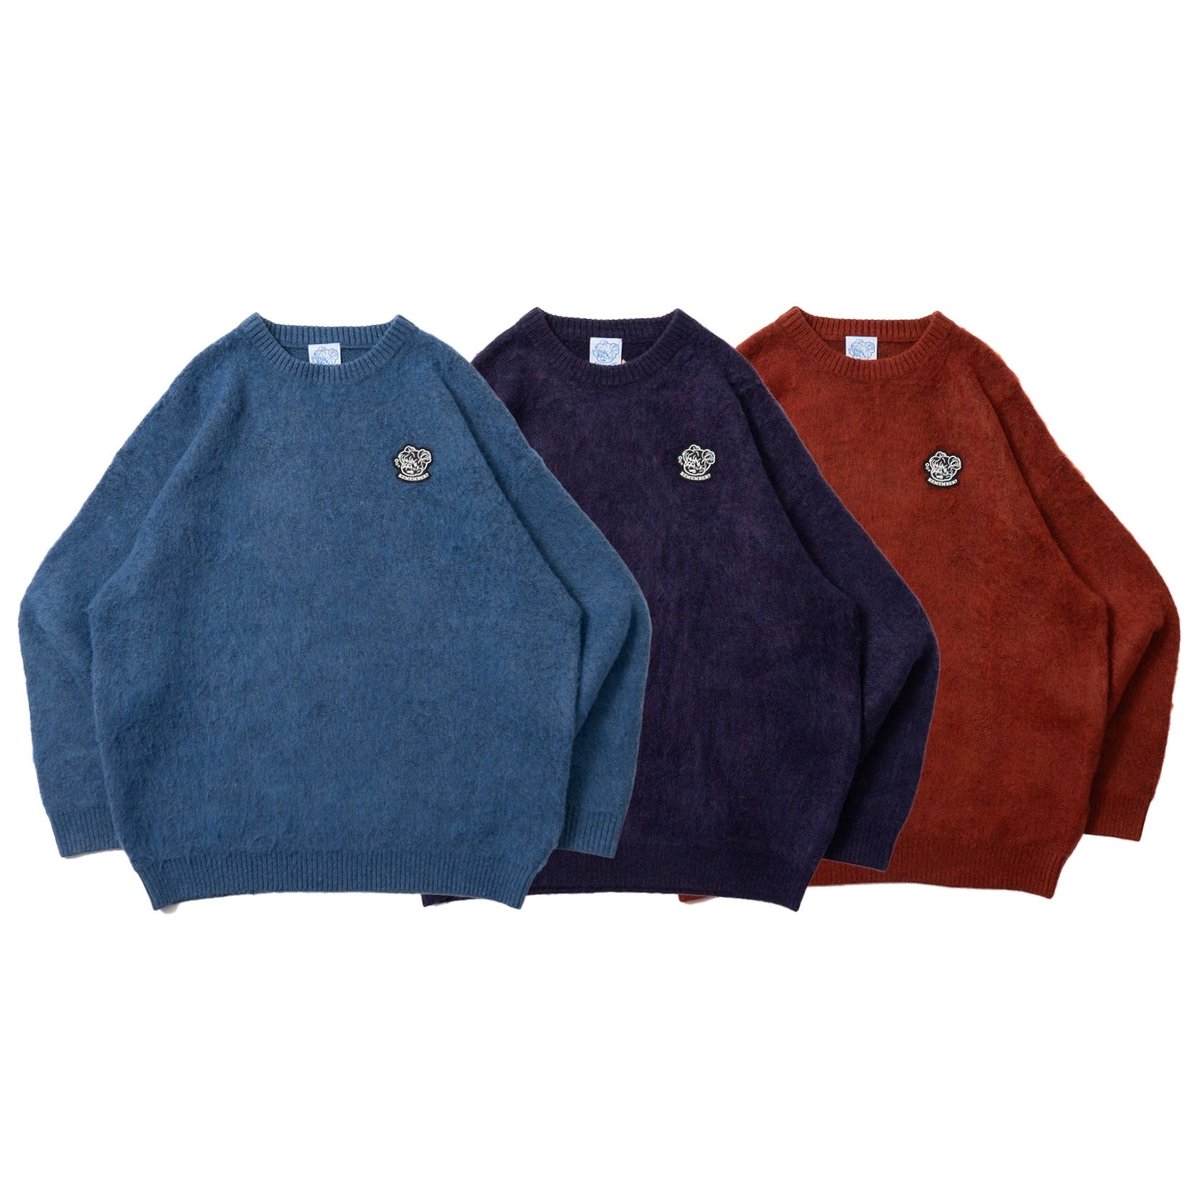 Purple】Rubber Tag Mohair Knit | Remember.